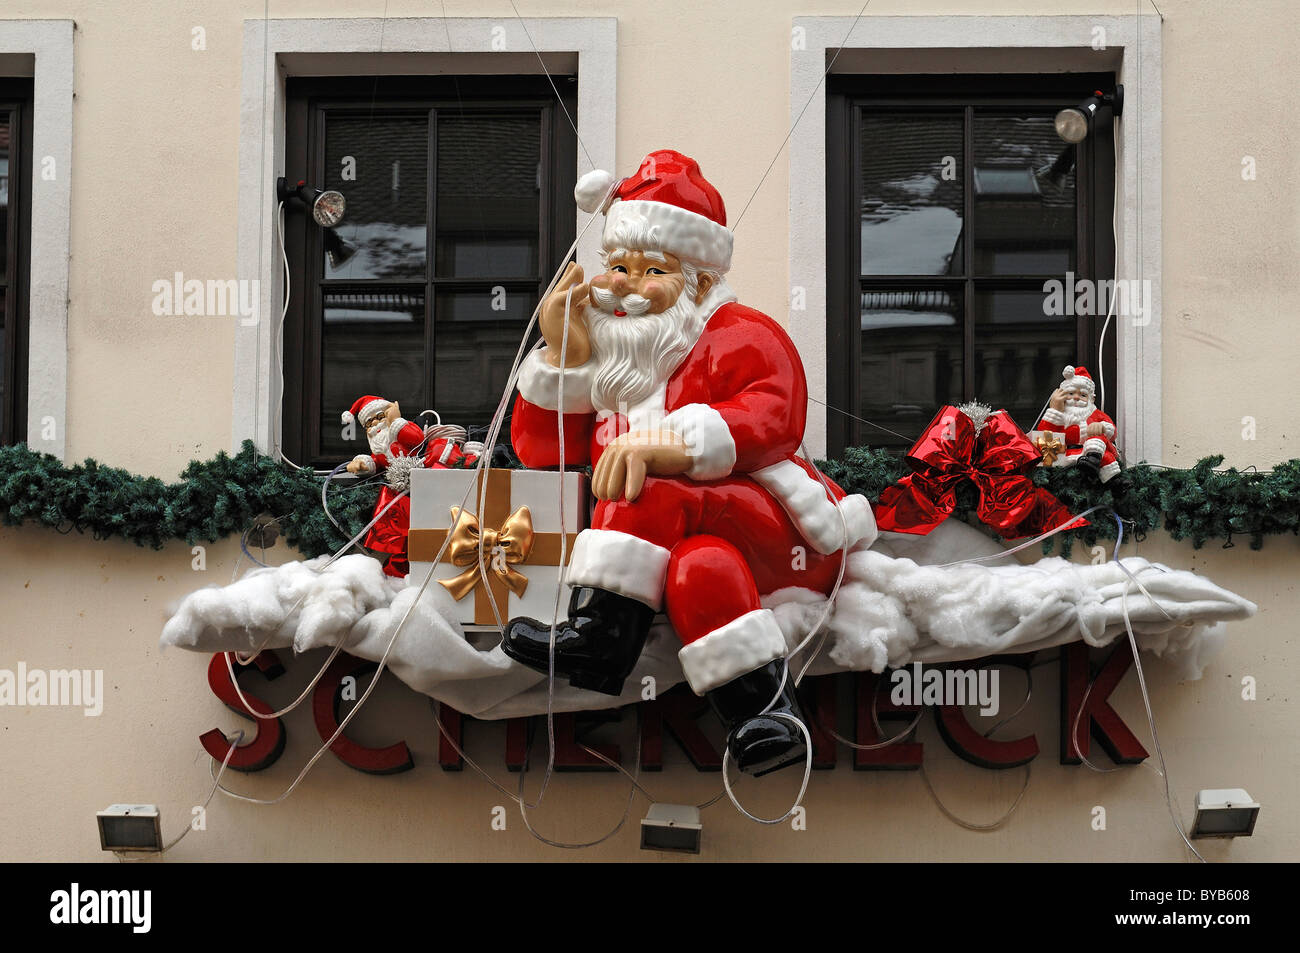 Santa Claus decoration figure outside a commercial building, Erlangen,  Middle Franconia, Bavaria, Germany, Europe Stock Photo - Alamy